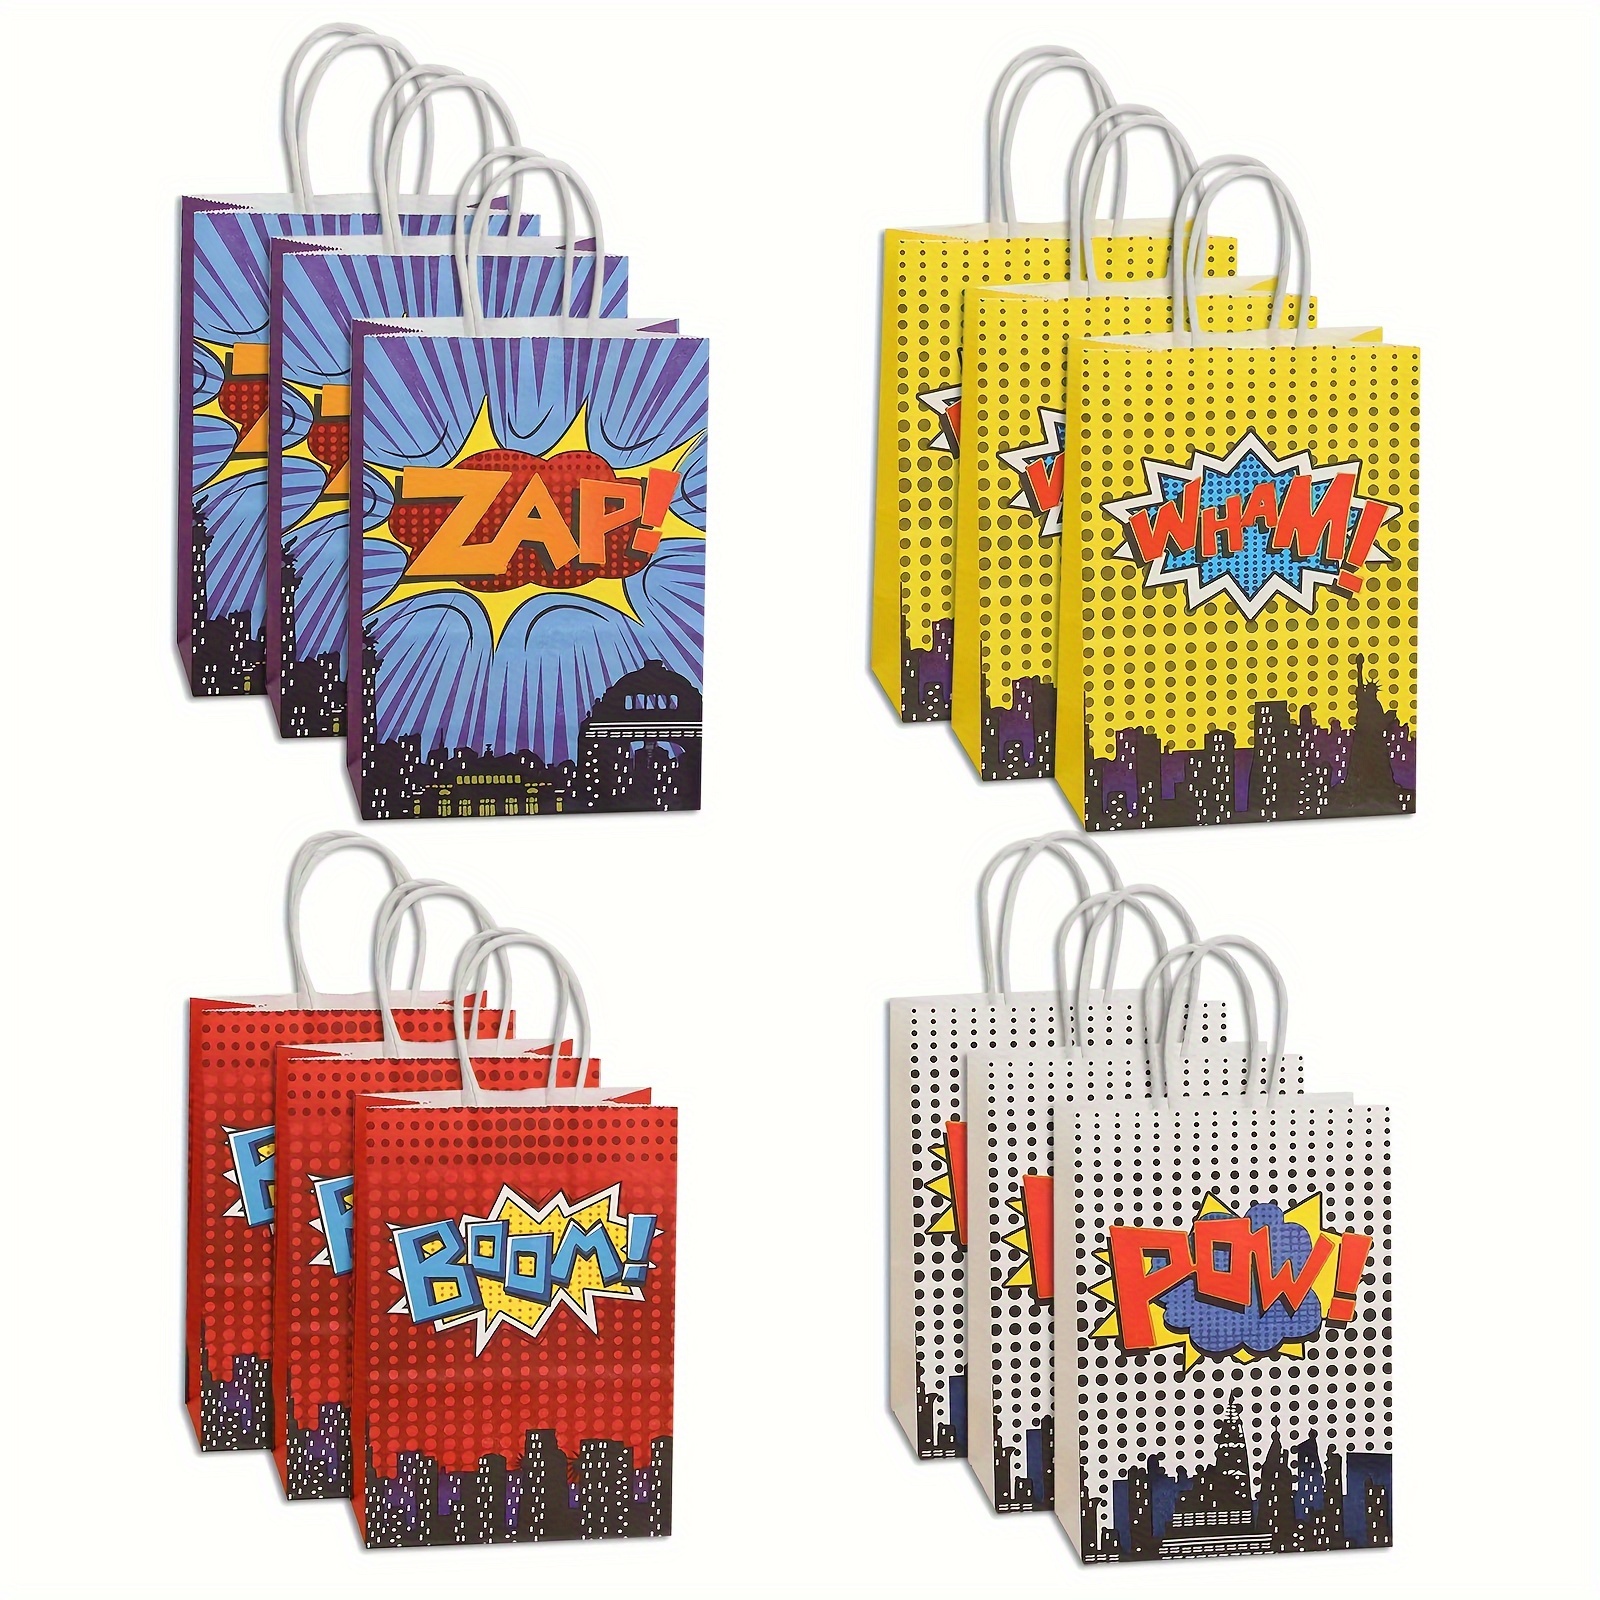 12Pcs Party Favor Bags Basketball Printing Gift Bags, Paper Bags with  Handles Goody Bags for Kids Birthday Wedding Business - AliExpress